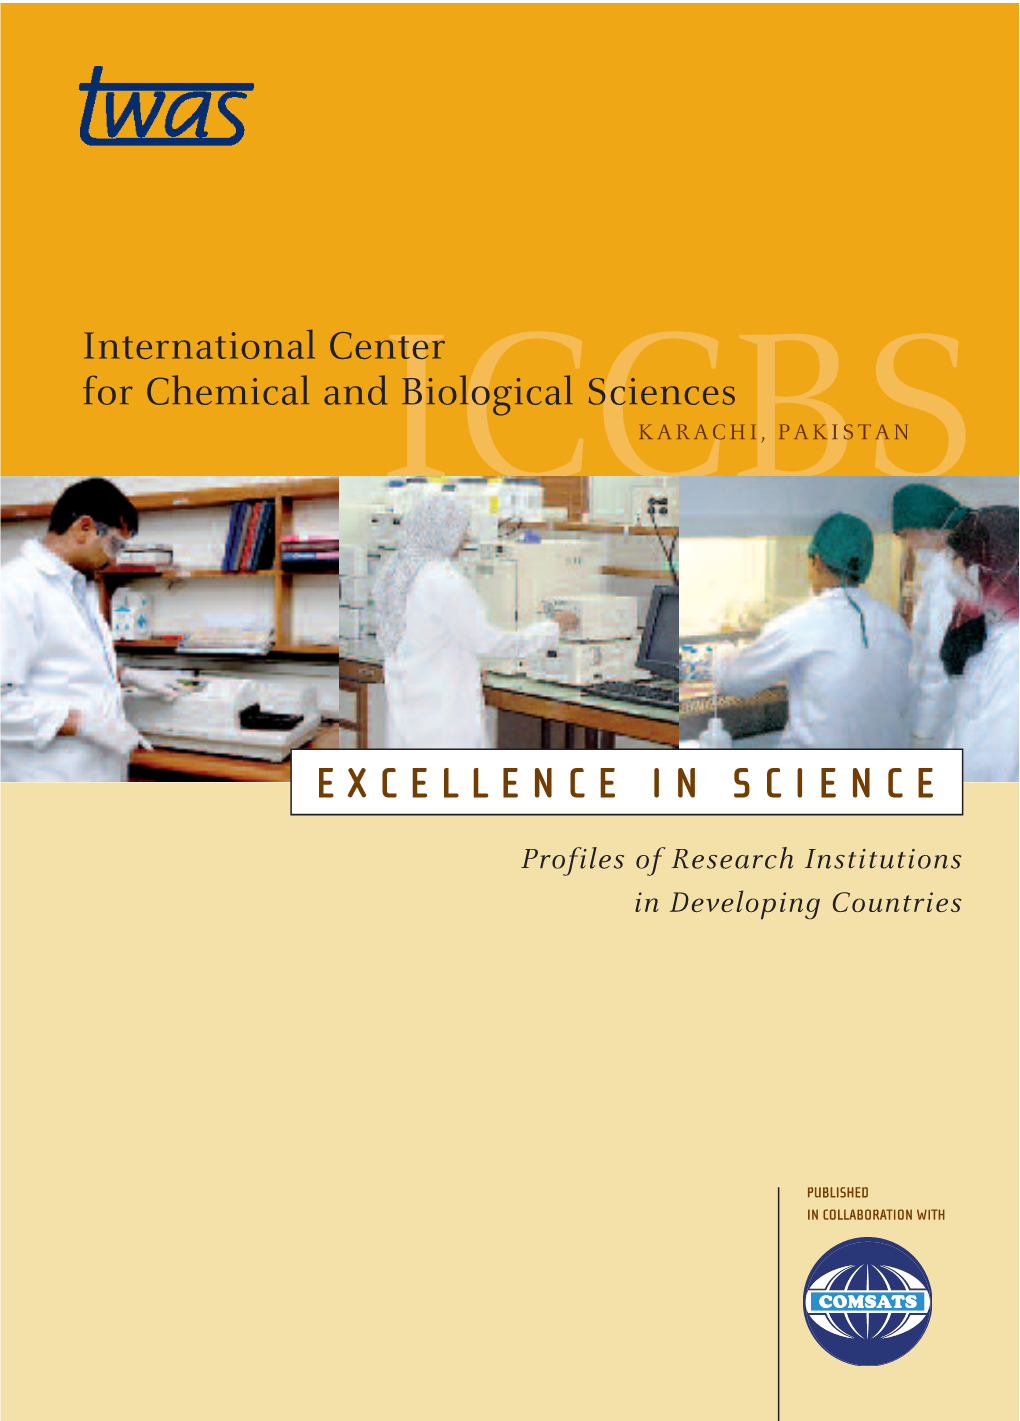 International Center for Chemical and Biological Sciences, Pakistan